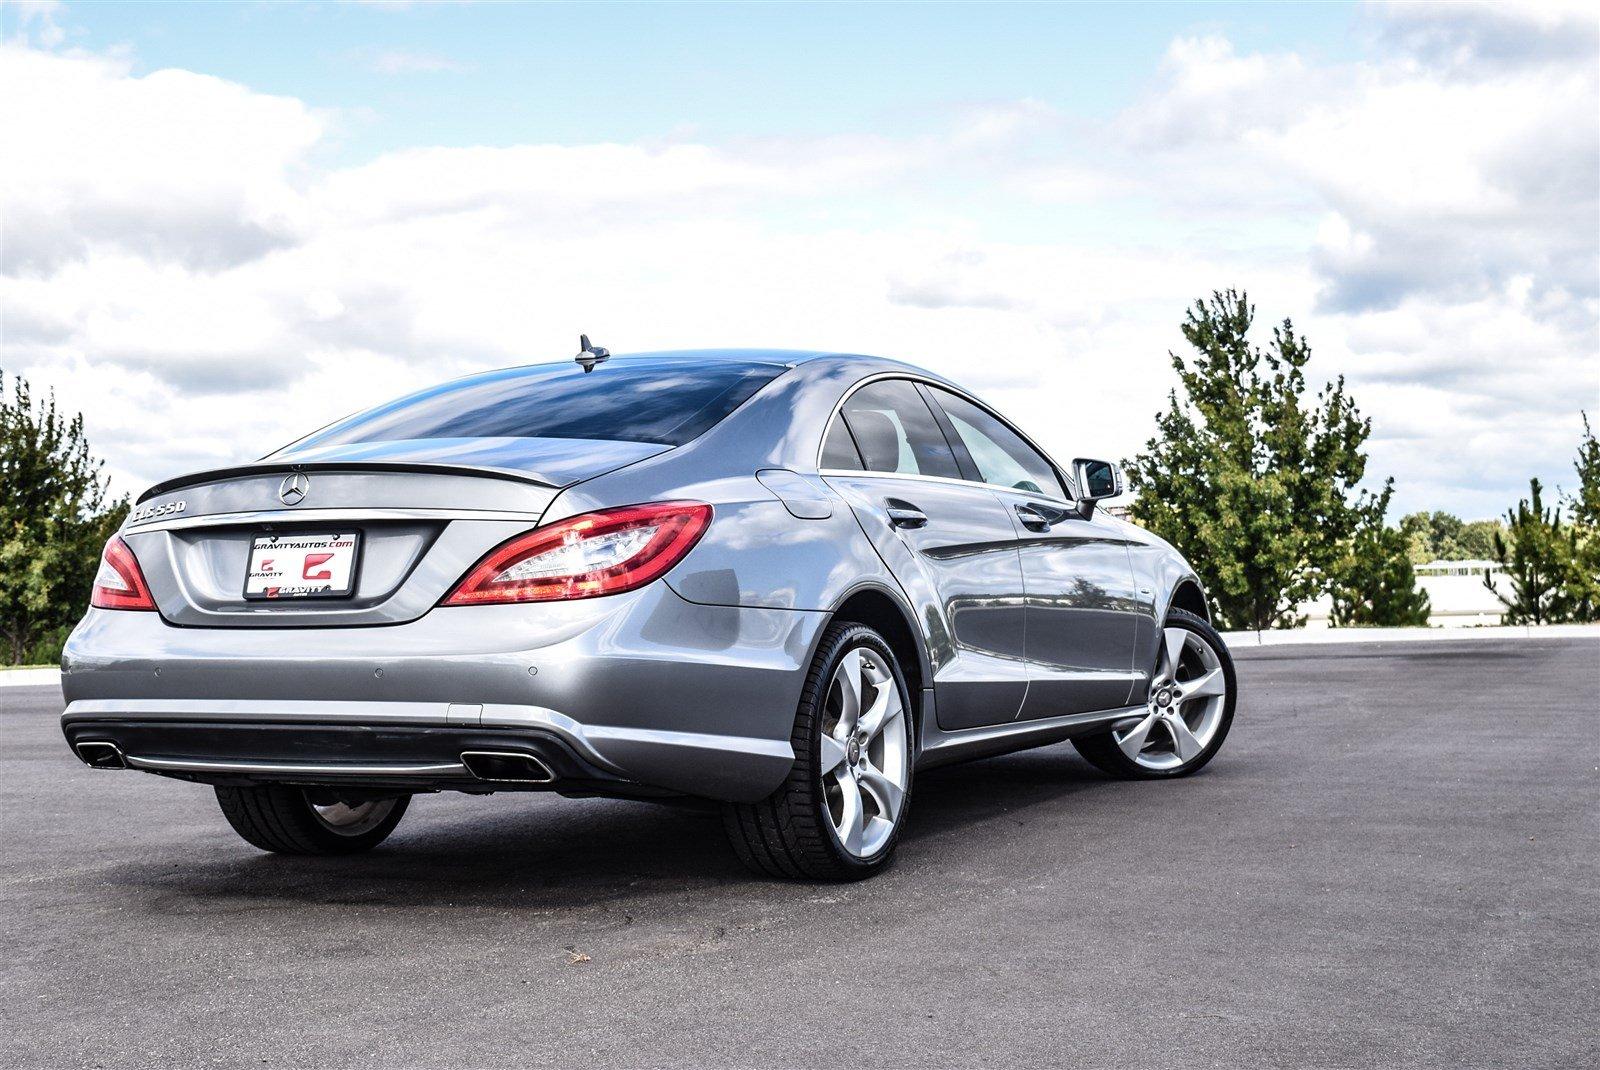 Used 2012 Mercedes-Benz CLS-Class CLS550 for sale Sold at Gravity Autos Marietta in Marietta GA 30060 44